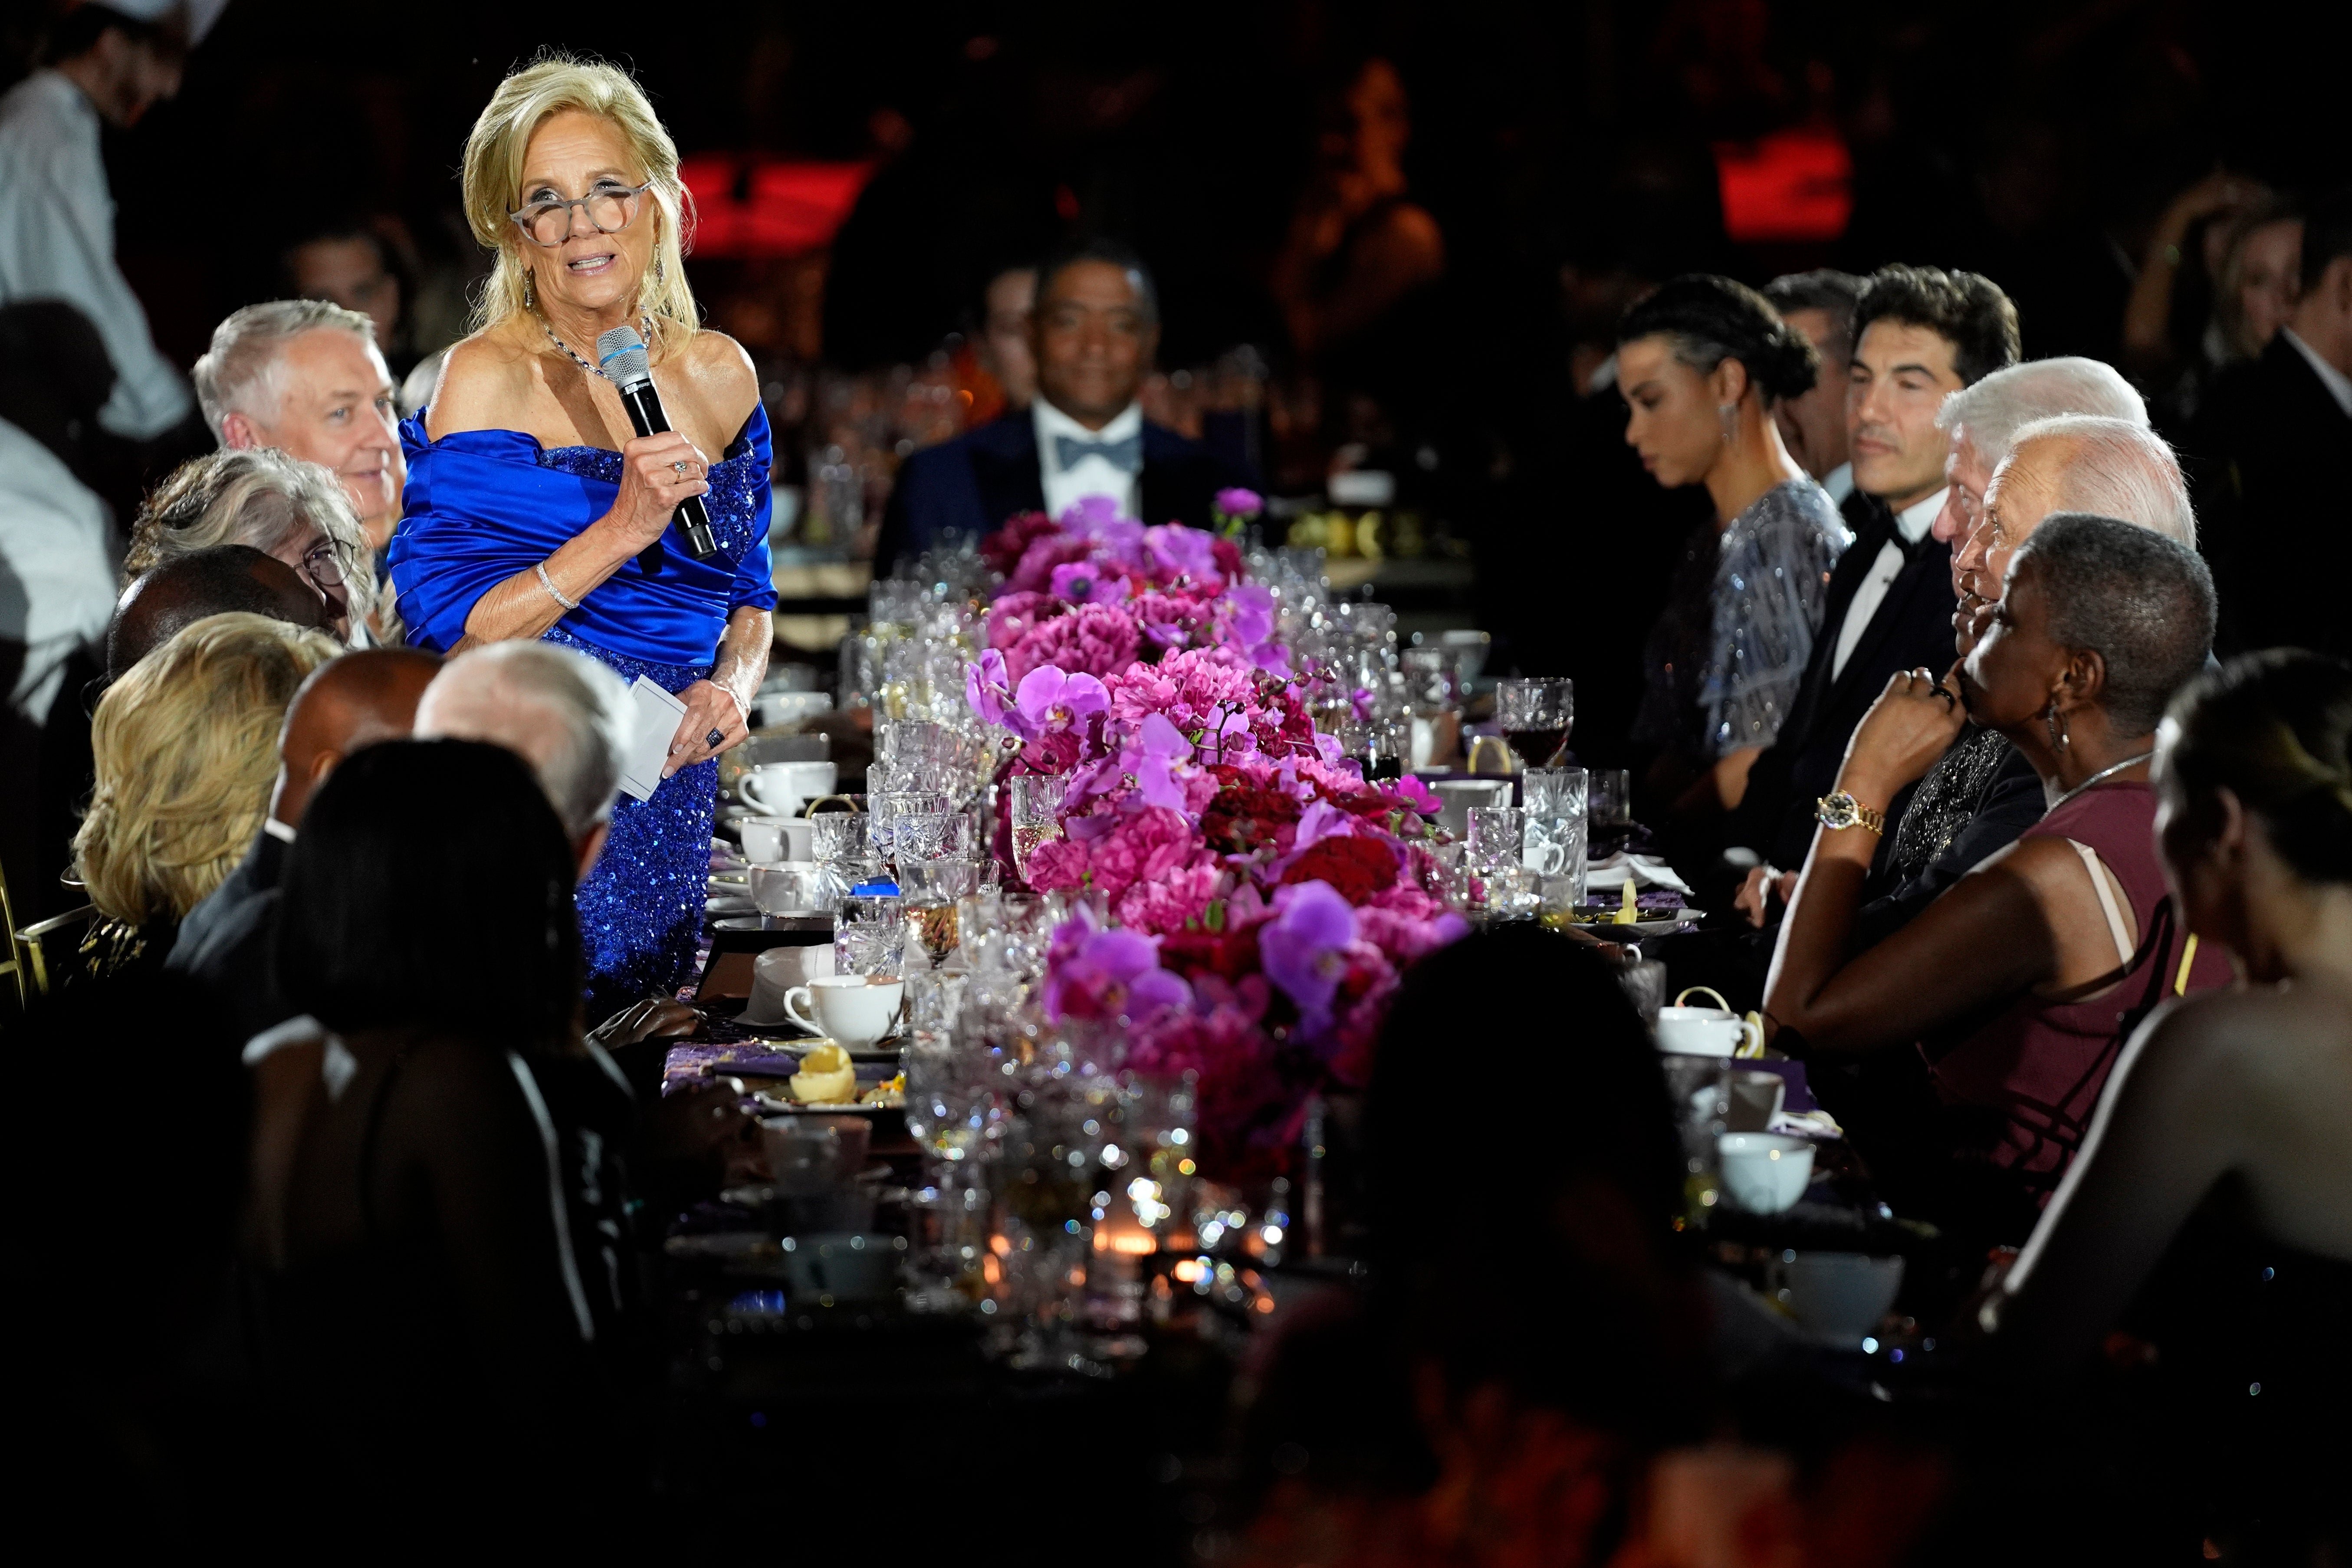 First Lady Jill Biden speaks before county music performer Brad Paisley sings during the State Dinner